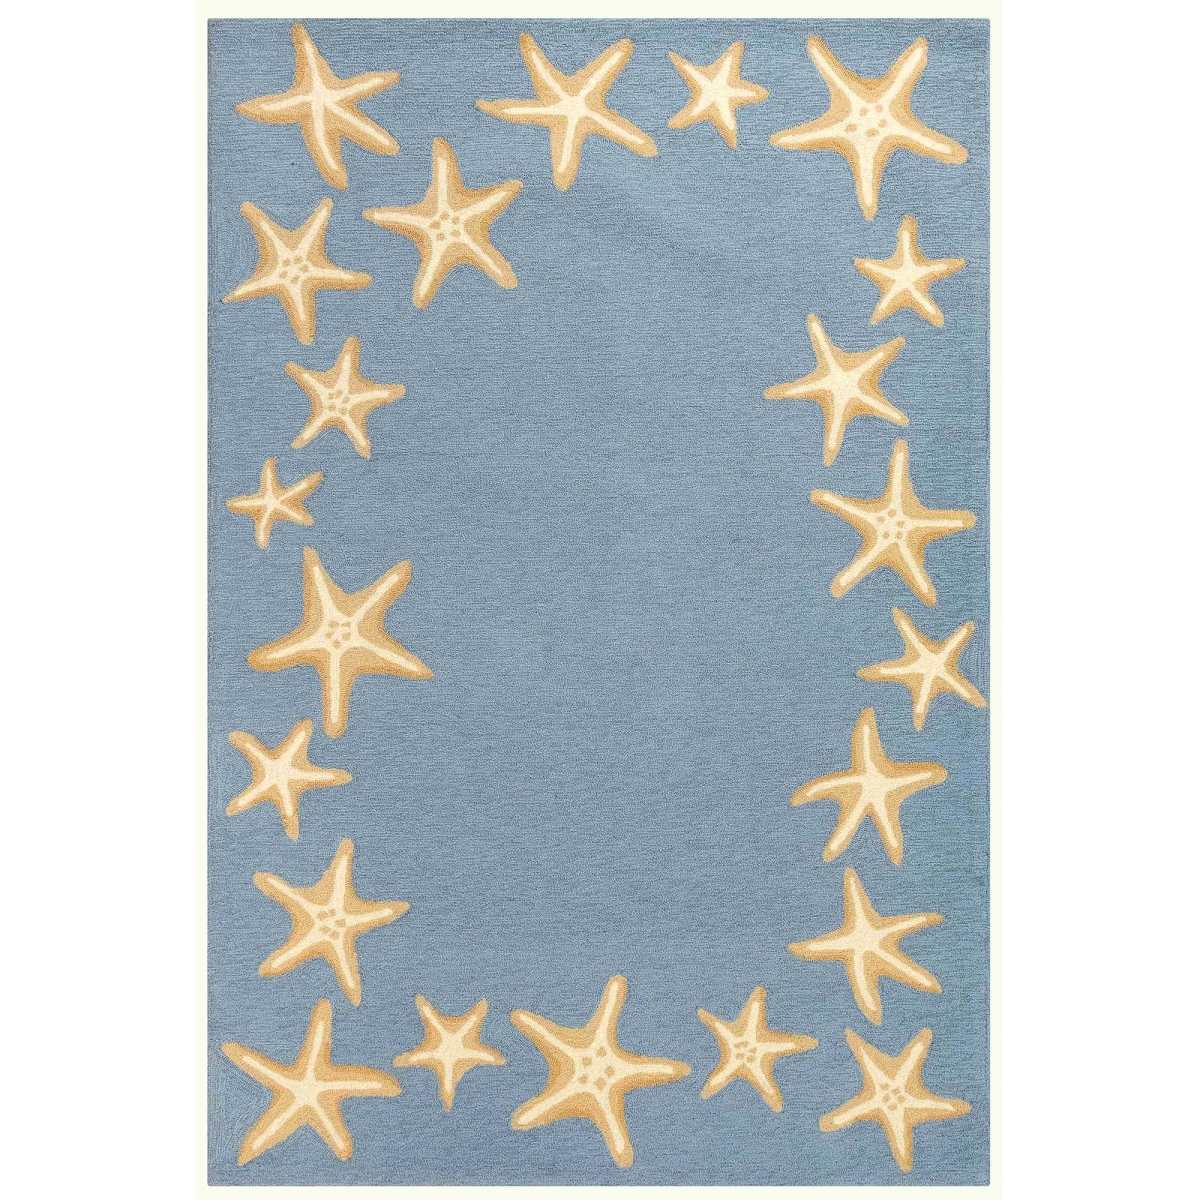 Trans-ocean Imports Cap57171003 5 Ft. X 7 Ft. 6 In. Liora Manne Capri Starfish Border Indoor & Outdoor Hand Tufted Rectangle Rug - Bluewater